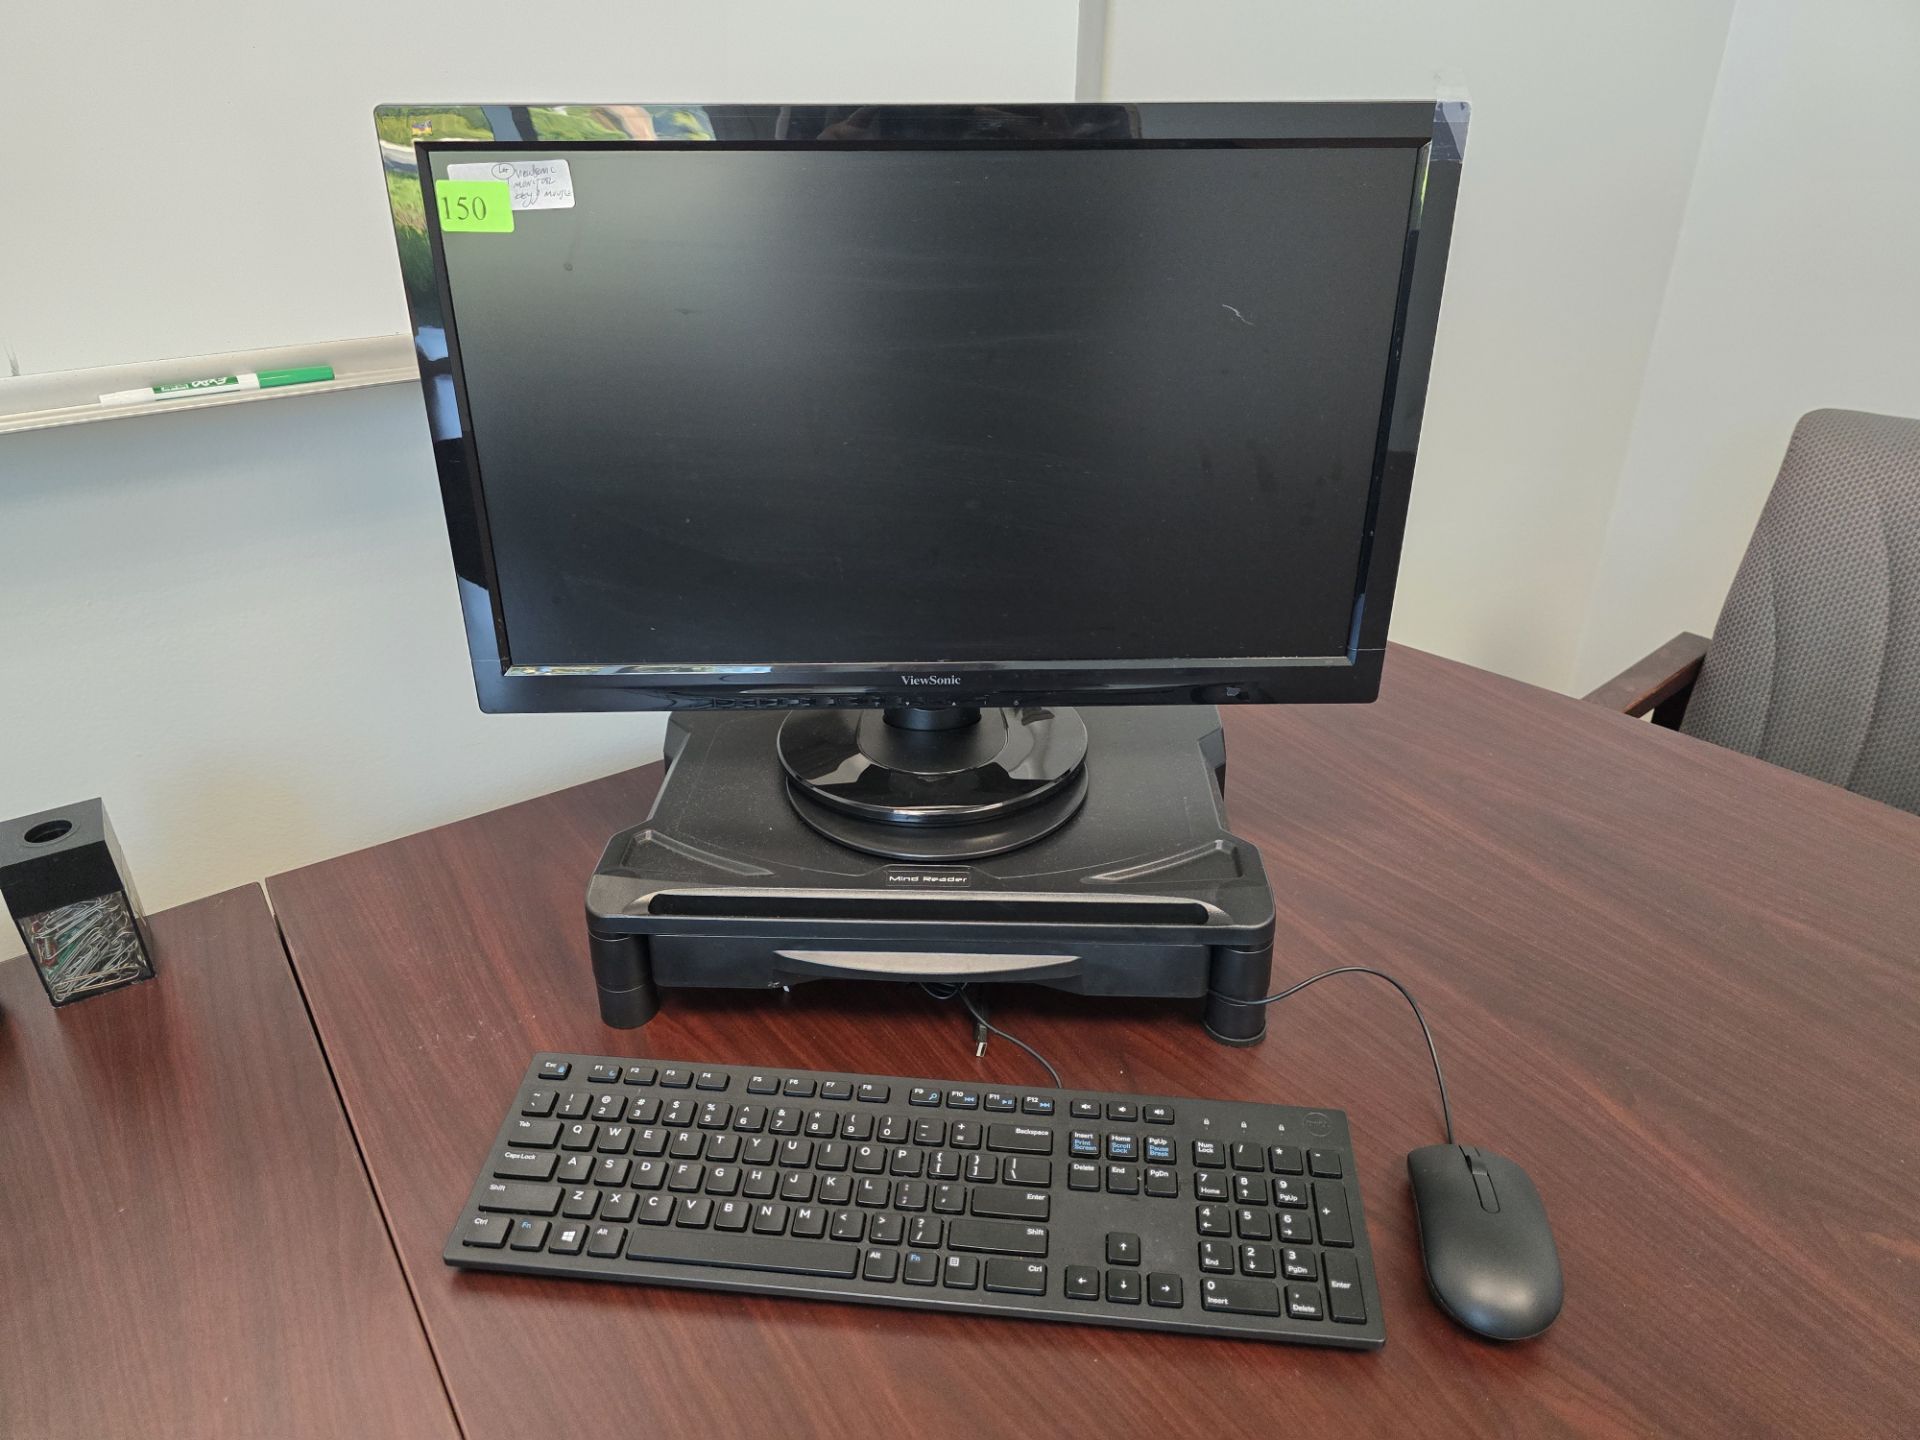 VIEWSONIC MONITOR KEYBOARD AND MOUSE